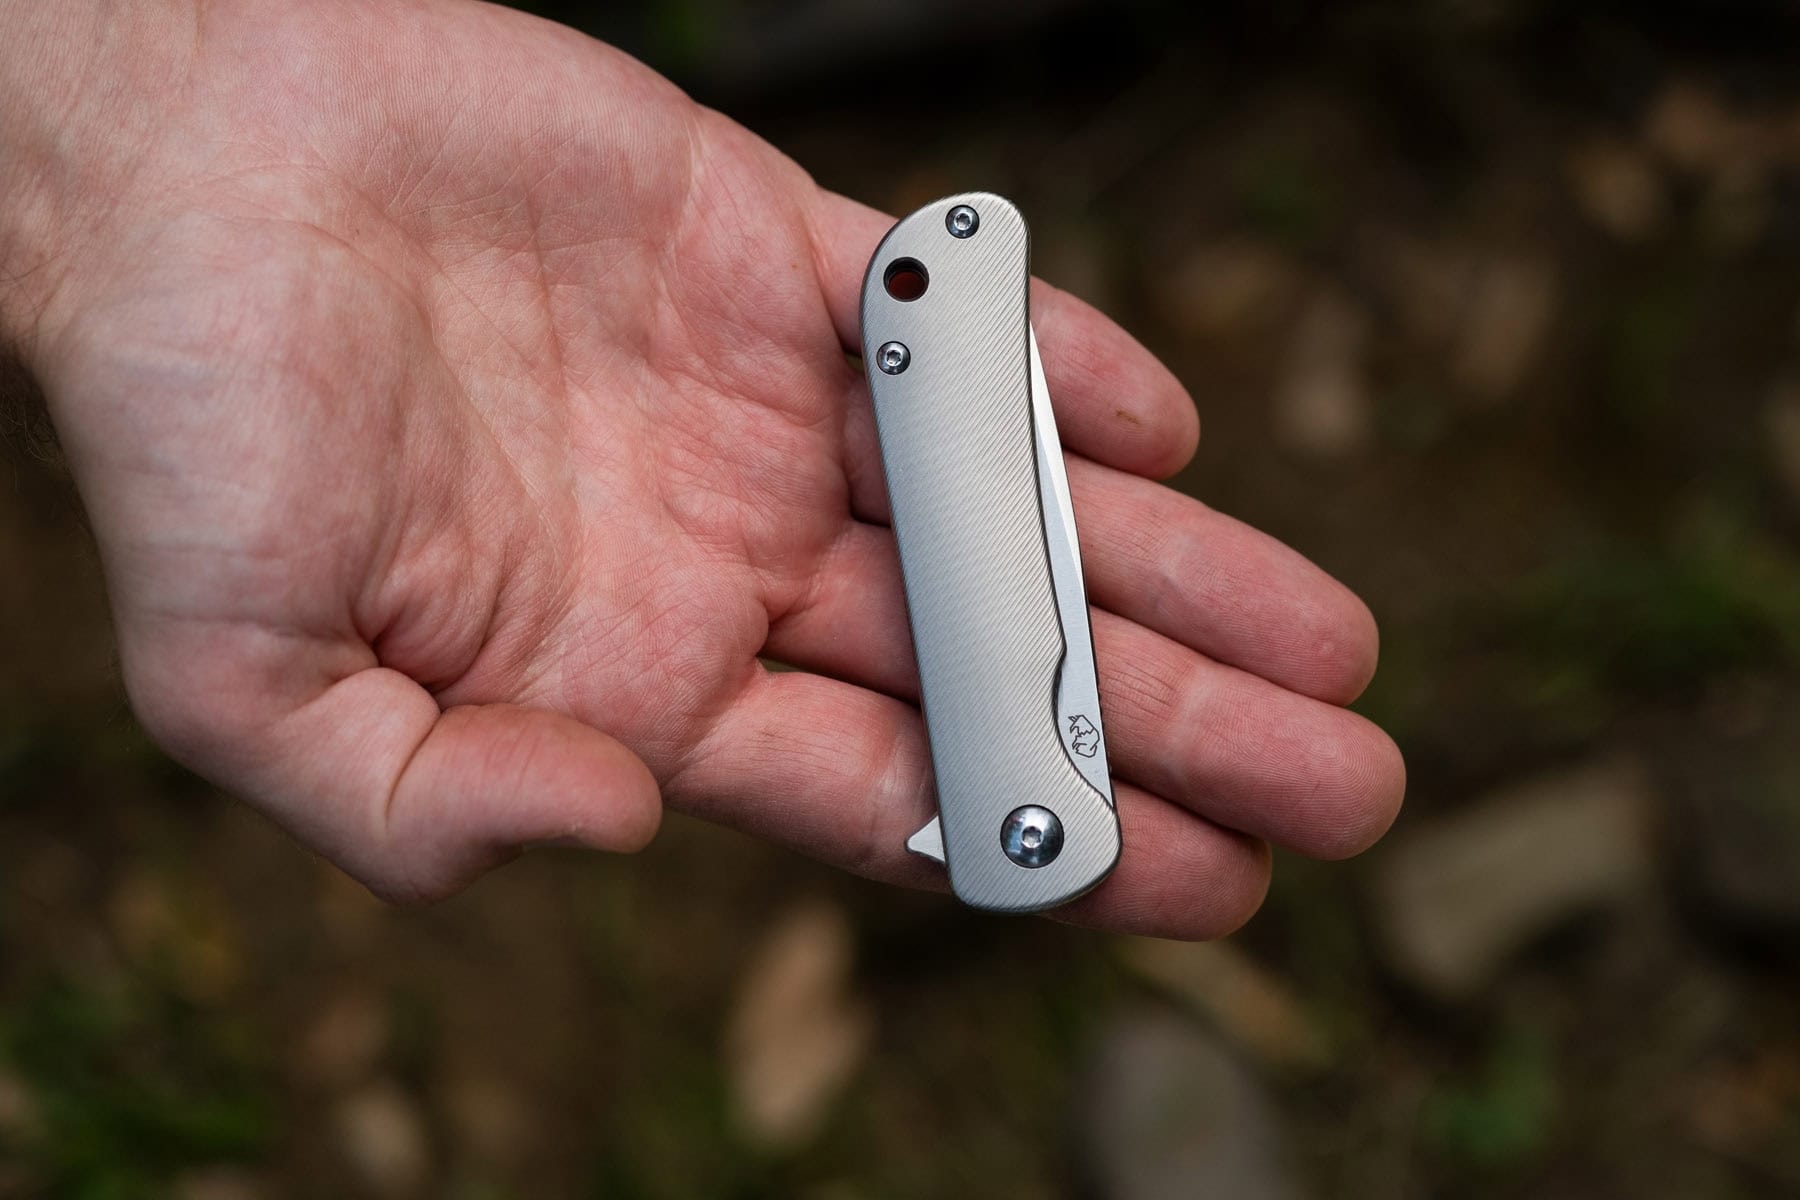 The titanium Fast Eddie rests easily on the fingers of an open hand.